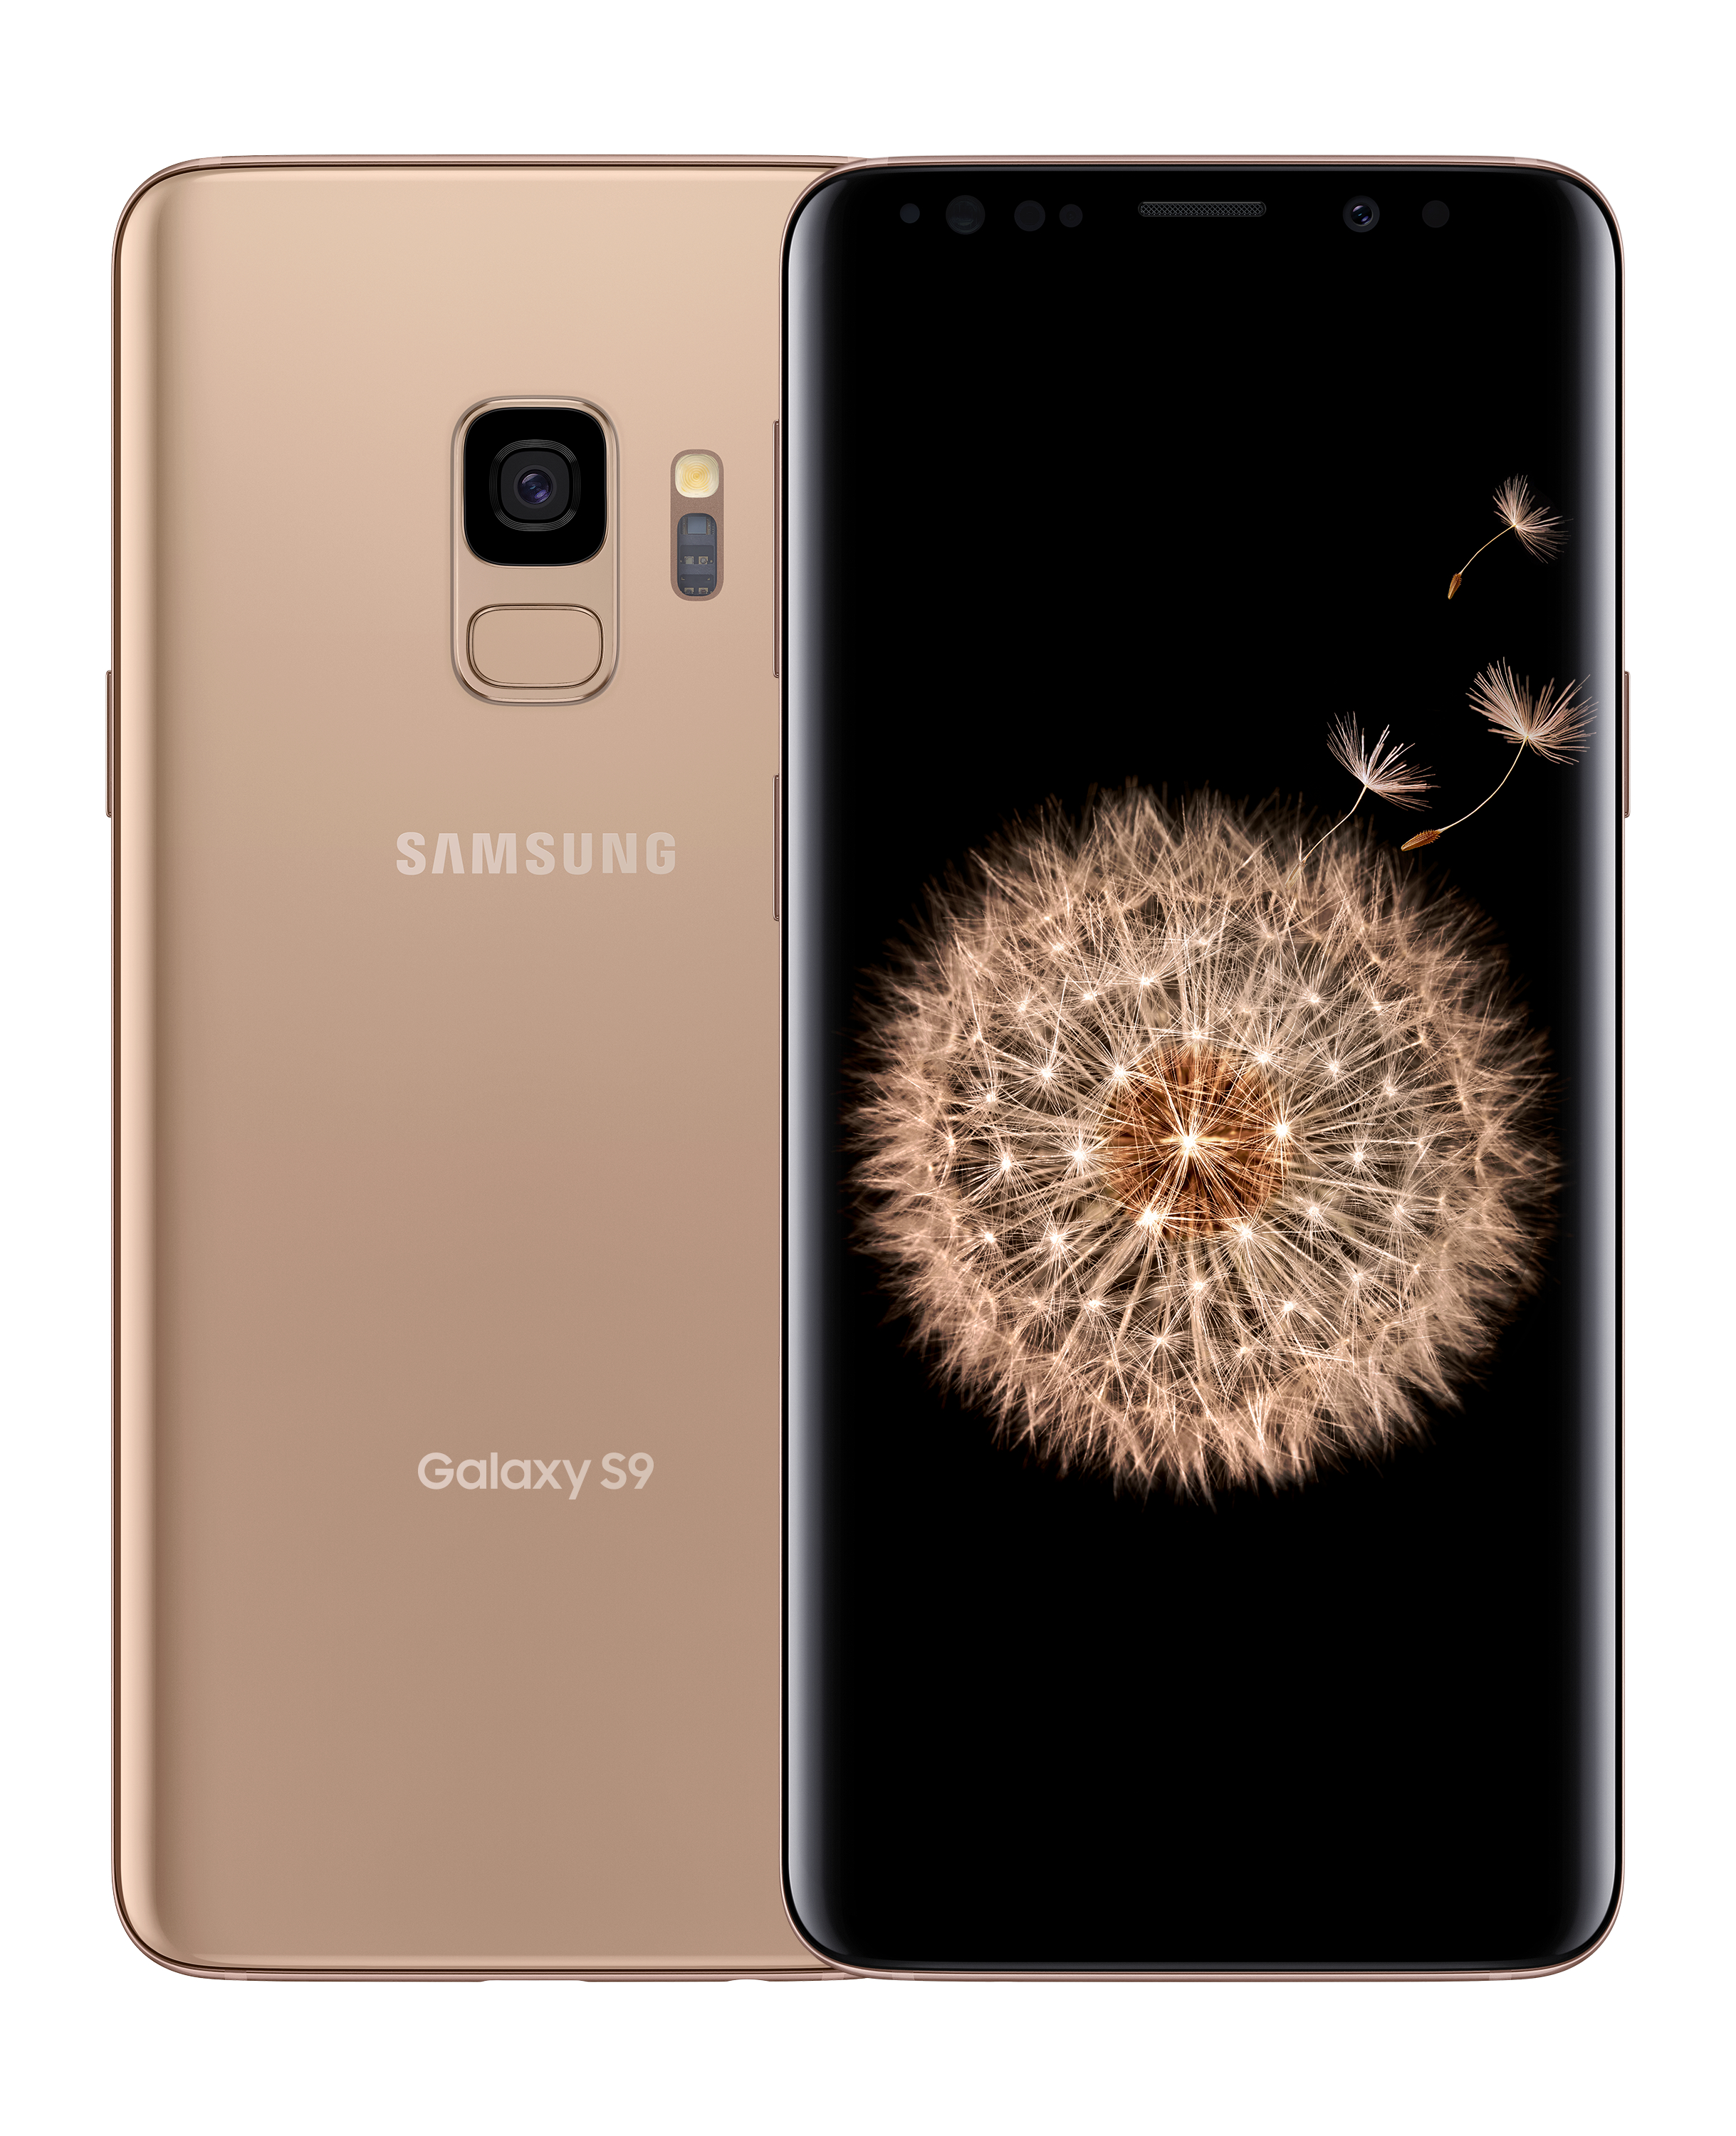 Samsung Galaxy S9 And S9 Sunrise Gold Available To Order In The Us